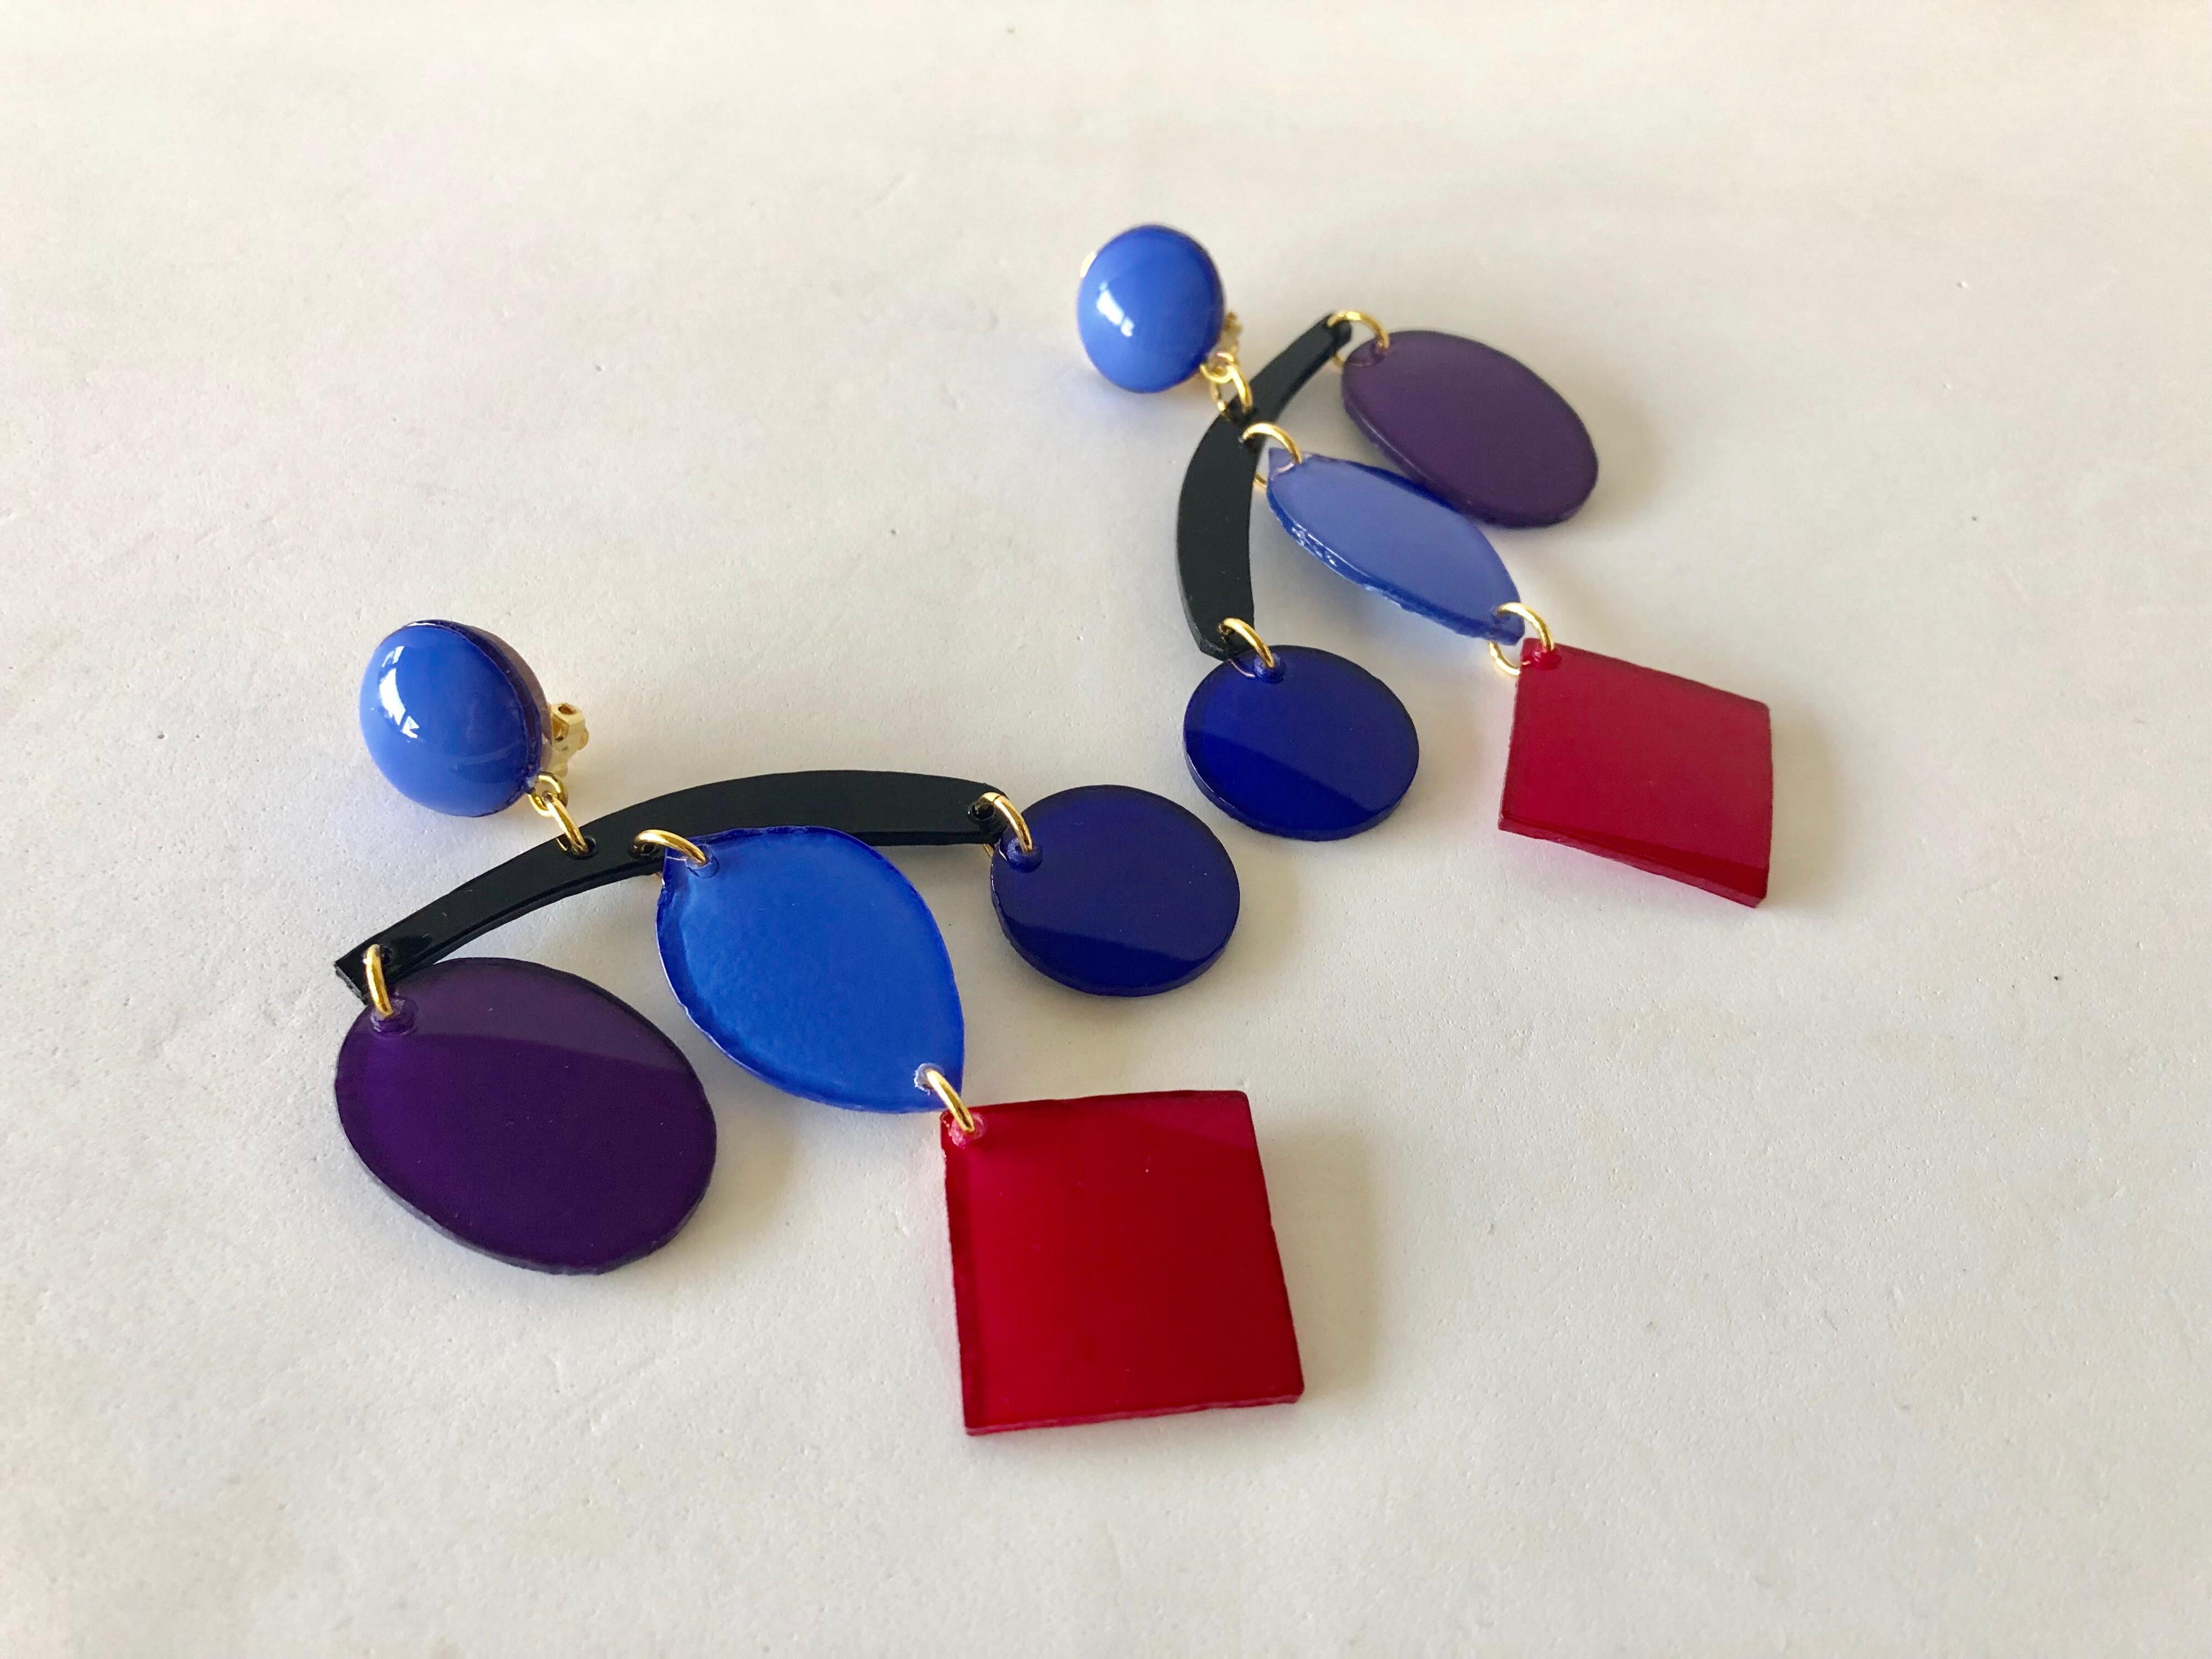 Light and easy to wear, these handmade artisanal contemporary clip-on earrings were made in Paris by Cilea. The lightweight clip-on earrings feature architectural enameline (enamel and resin composite) geometric segments resembling a Calder like